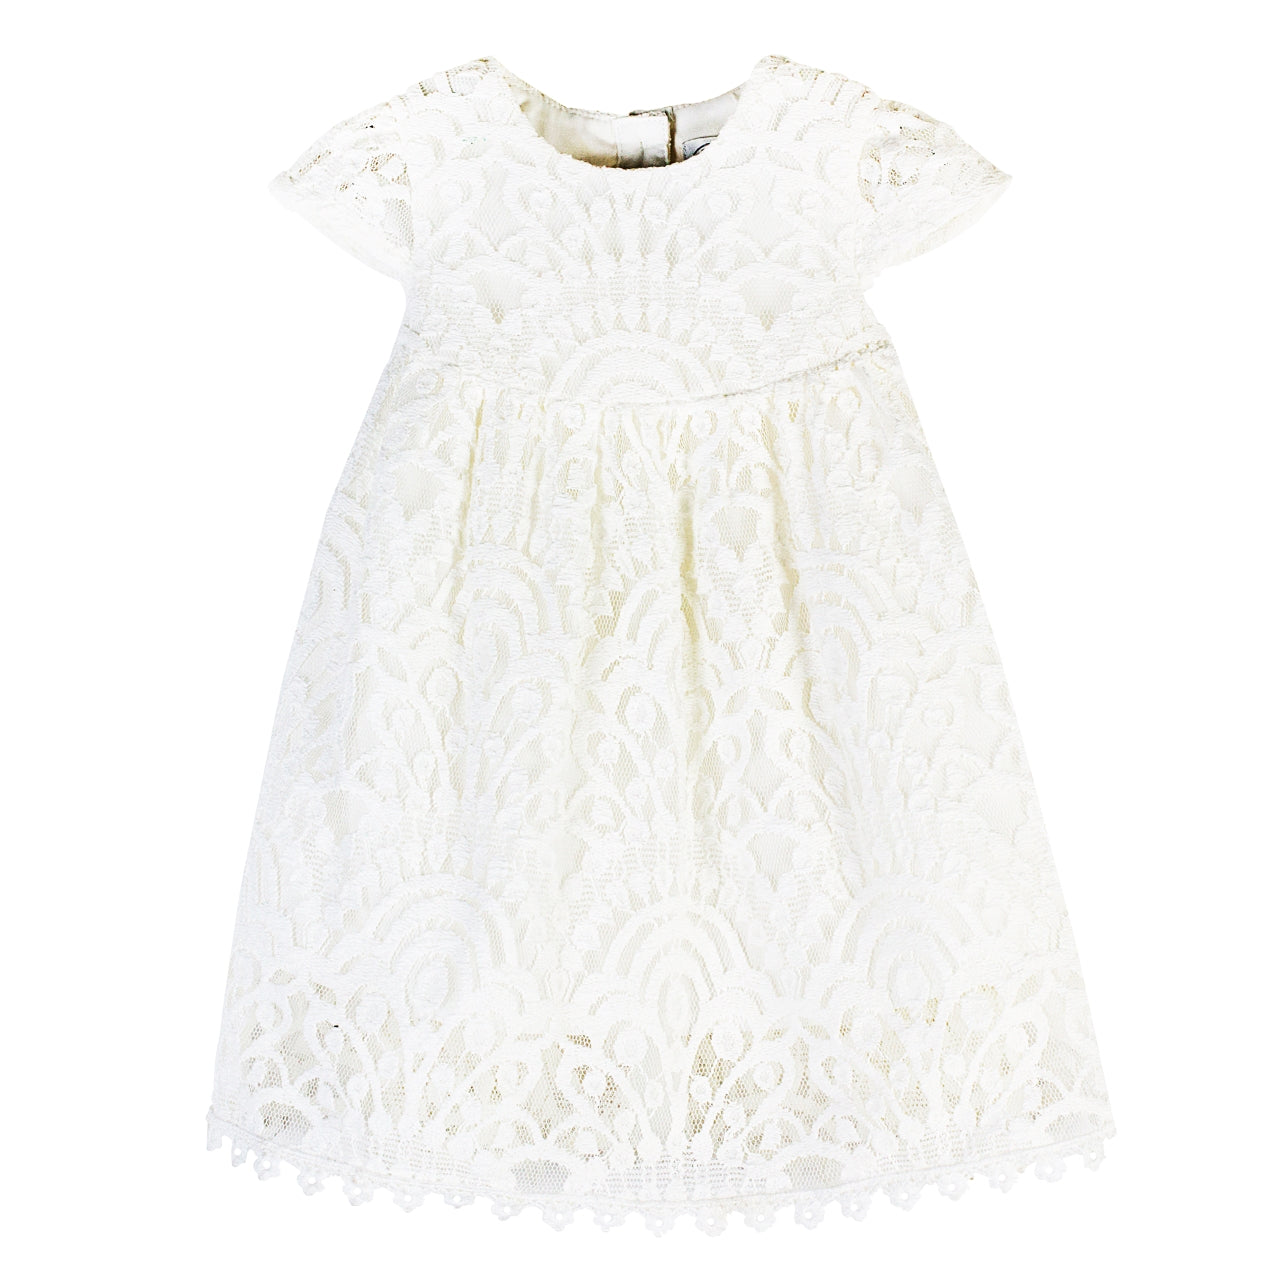 Wholesale Baby Girl Christening Lace Dress with Matching Bonnet 8 - Imagewear